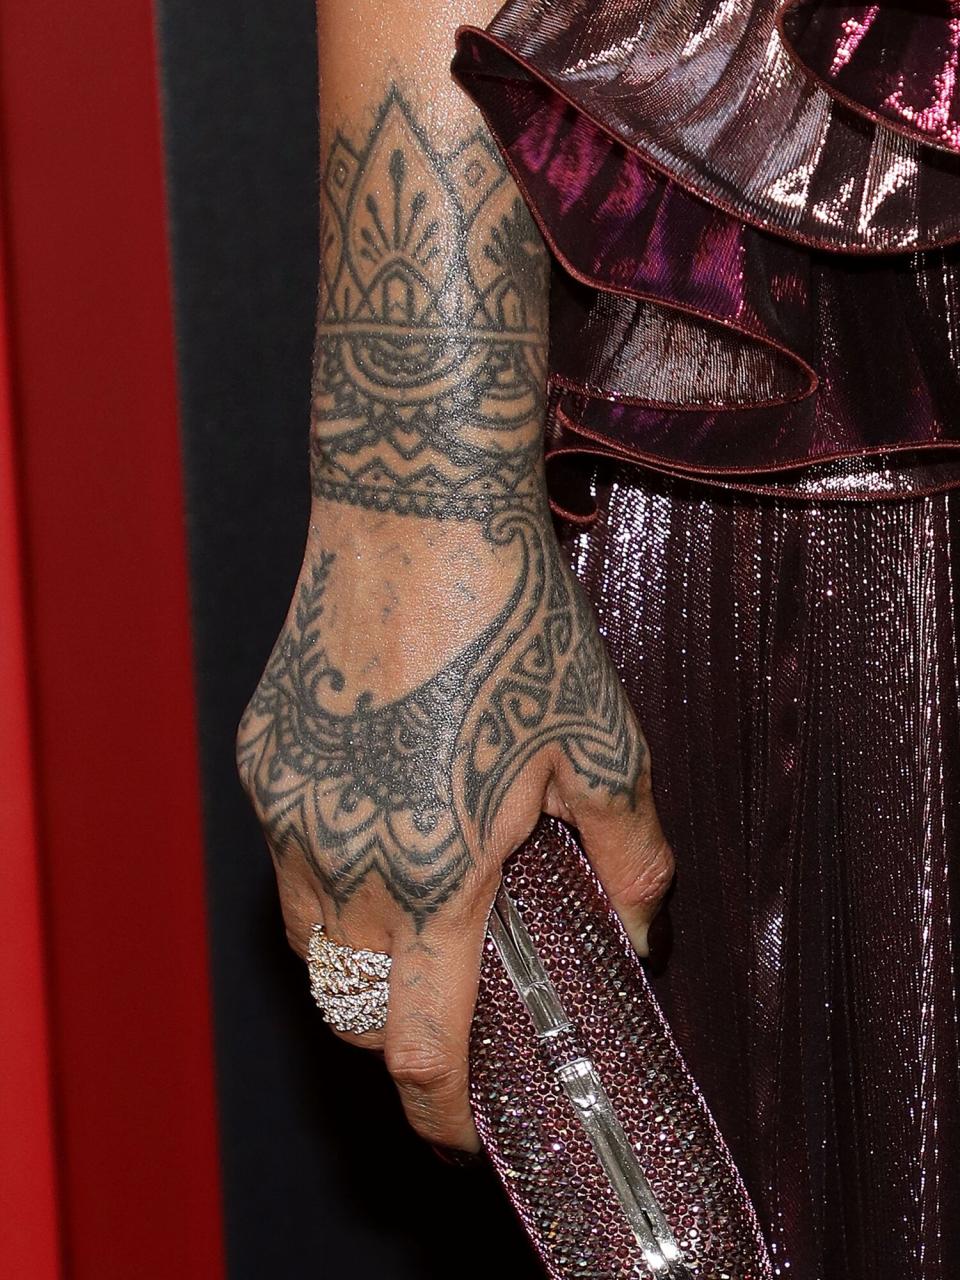 Rihanna, clutch and tattoo detail, attends the world premiere of "Ocean's 8" at Alice Tully Hall at Lincoln Center on June 5, 2018 in New York City